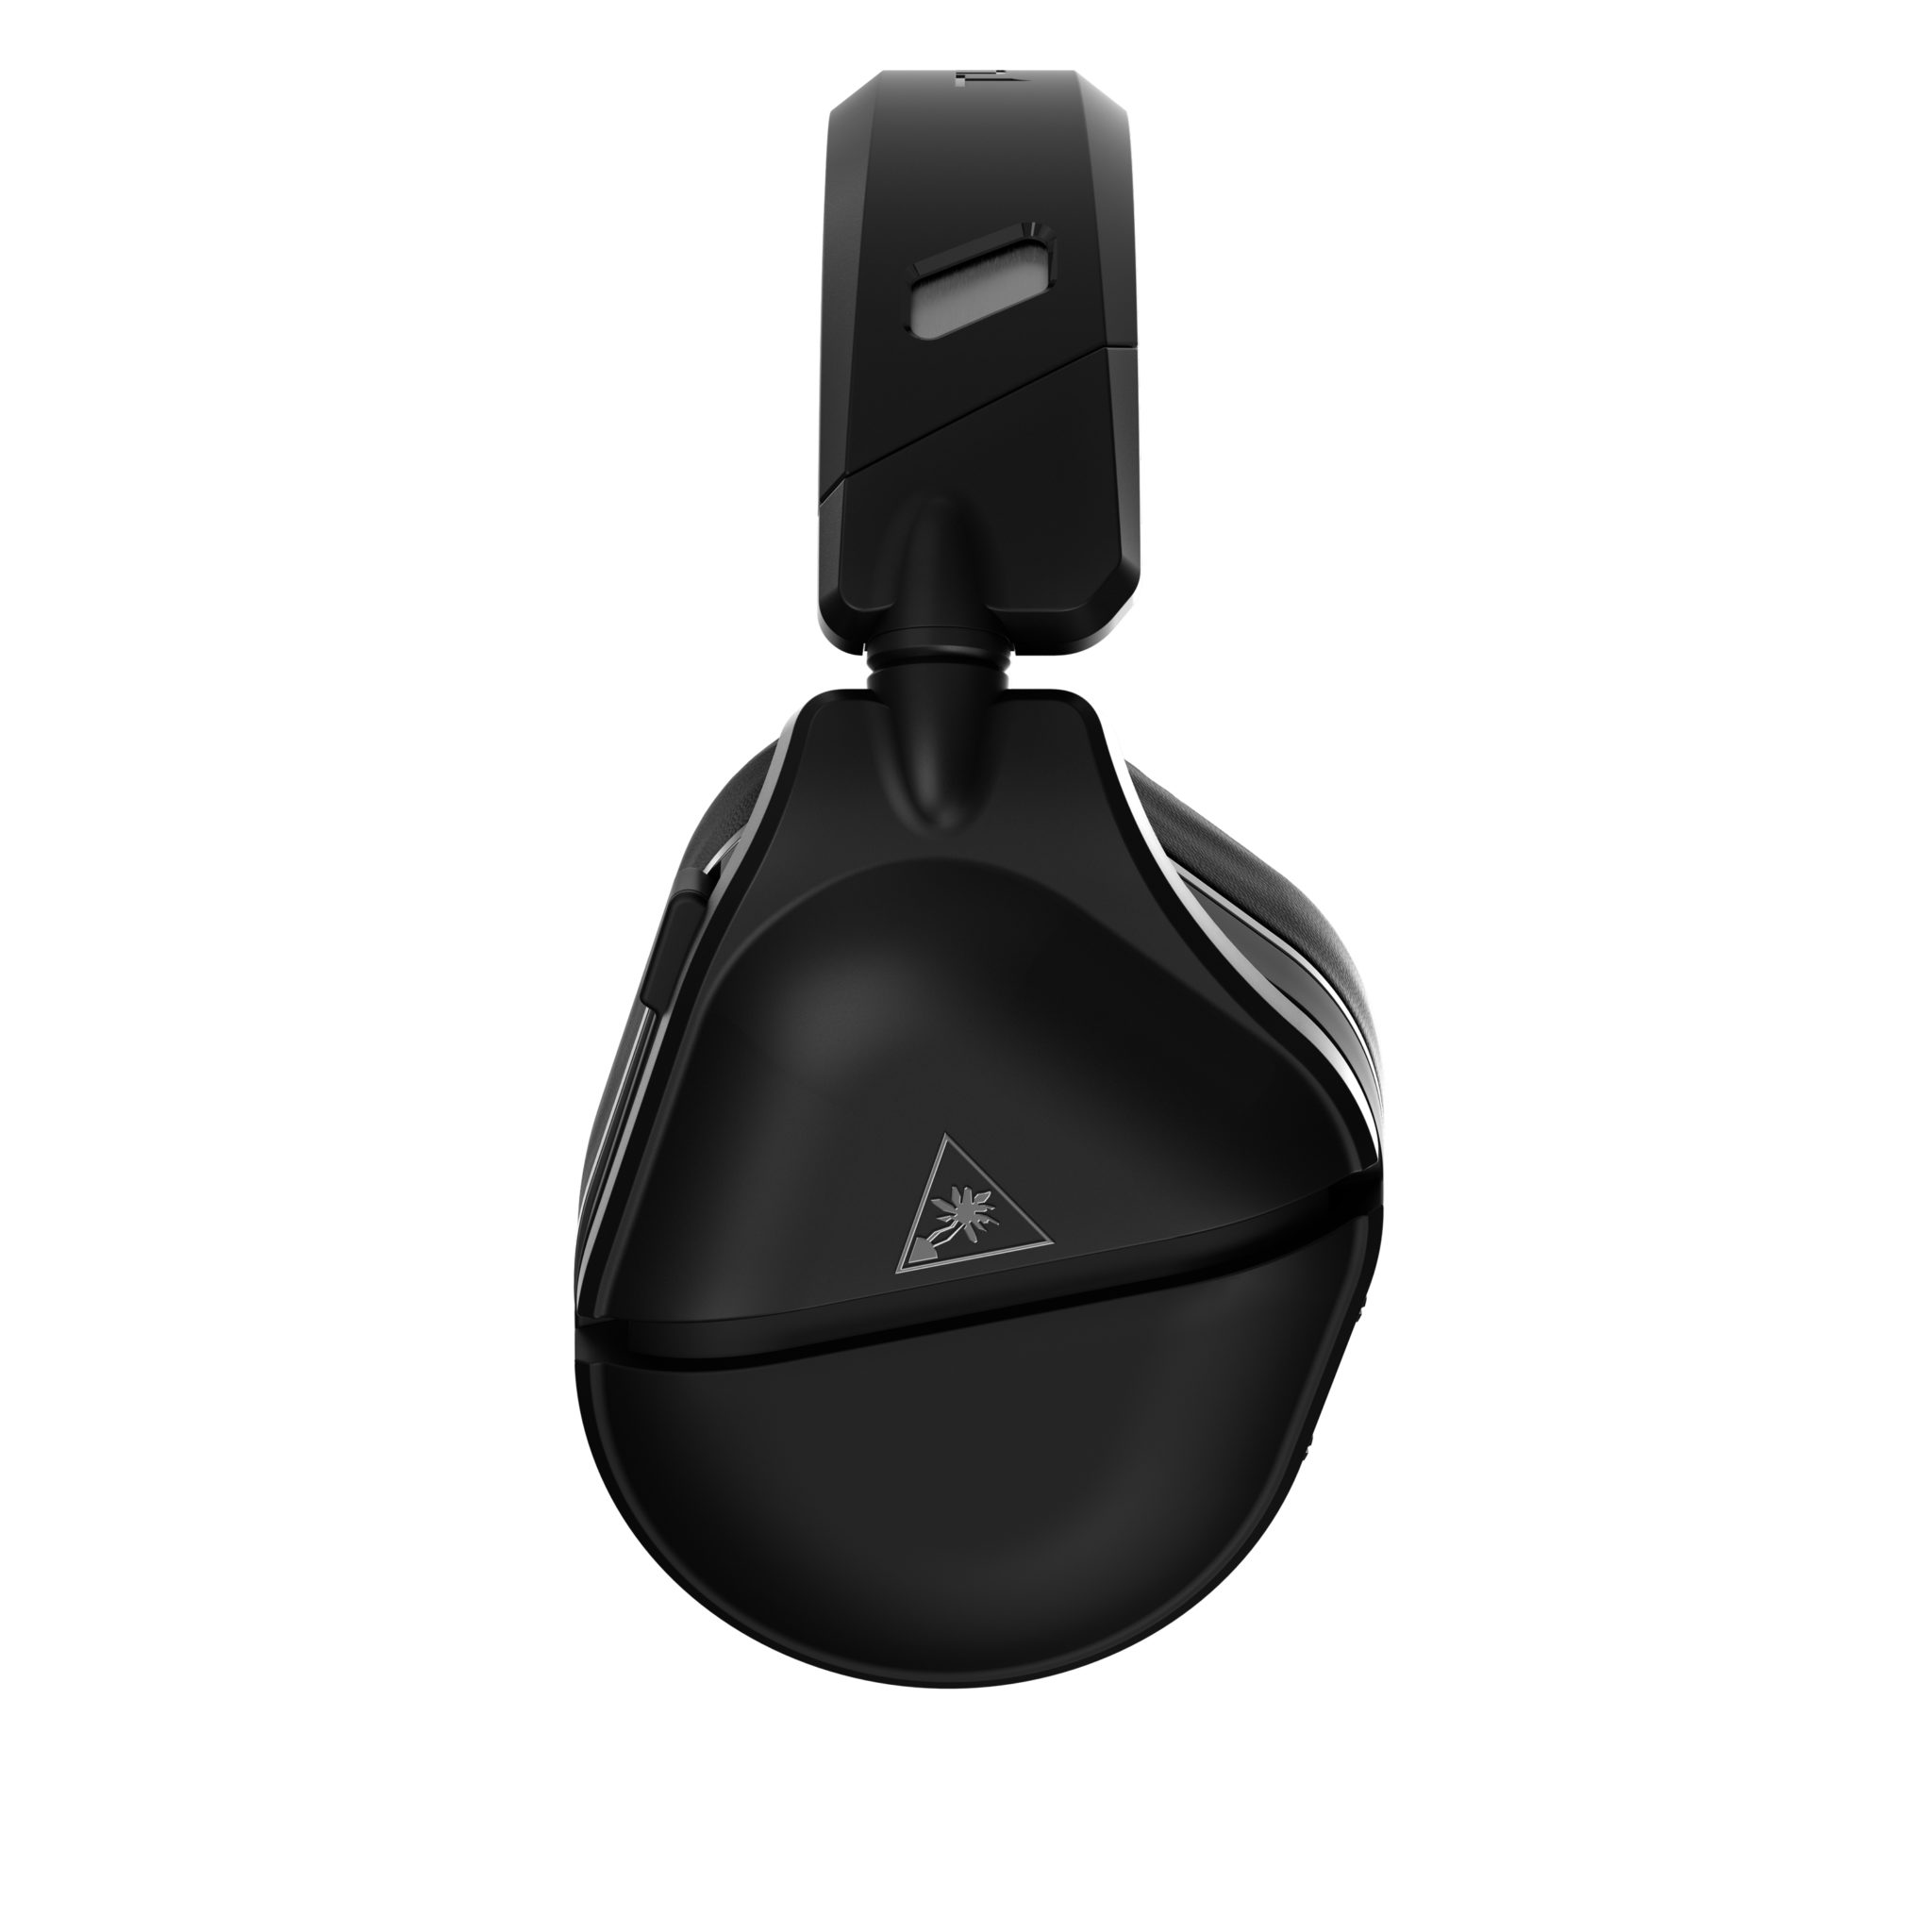 turtle beach audio hub not detecting stealth 700 on android